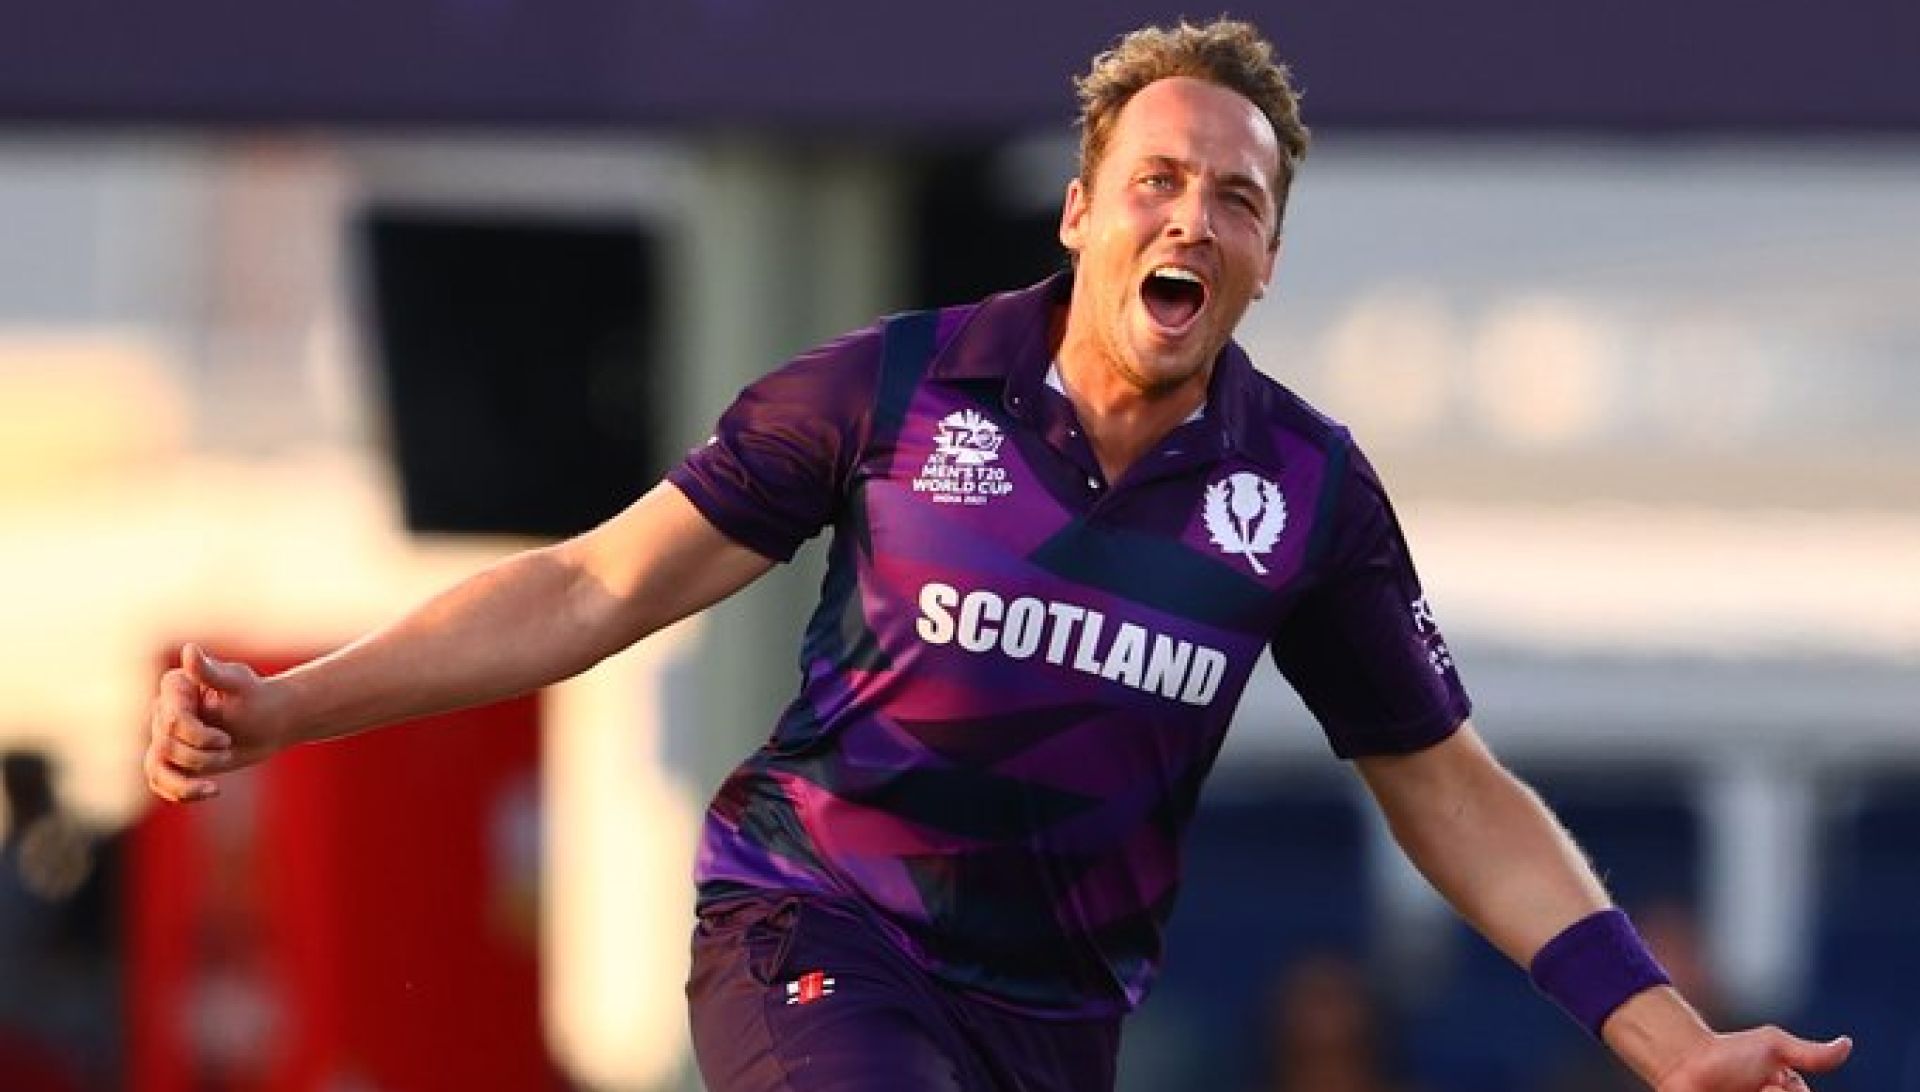 PNG fighting spirit too little too late as Berrington, Davey power Scotland to second win